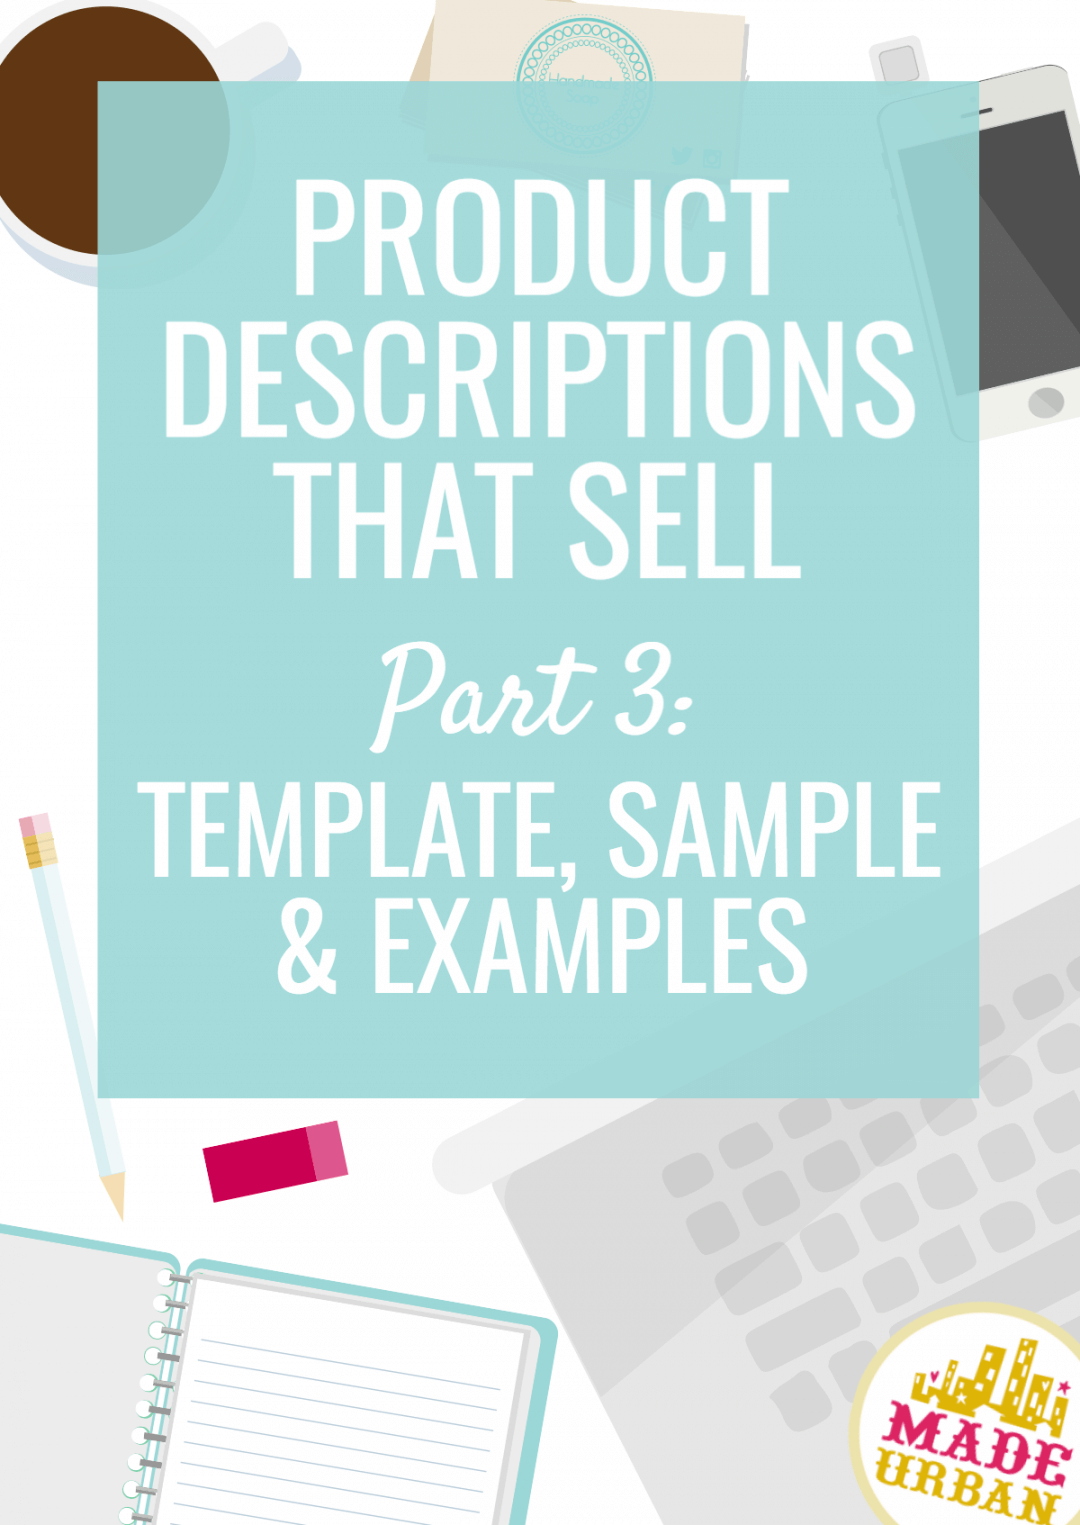 Product Description Template Free Word